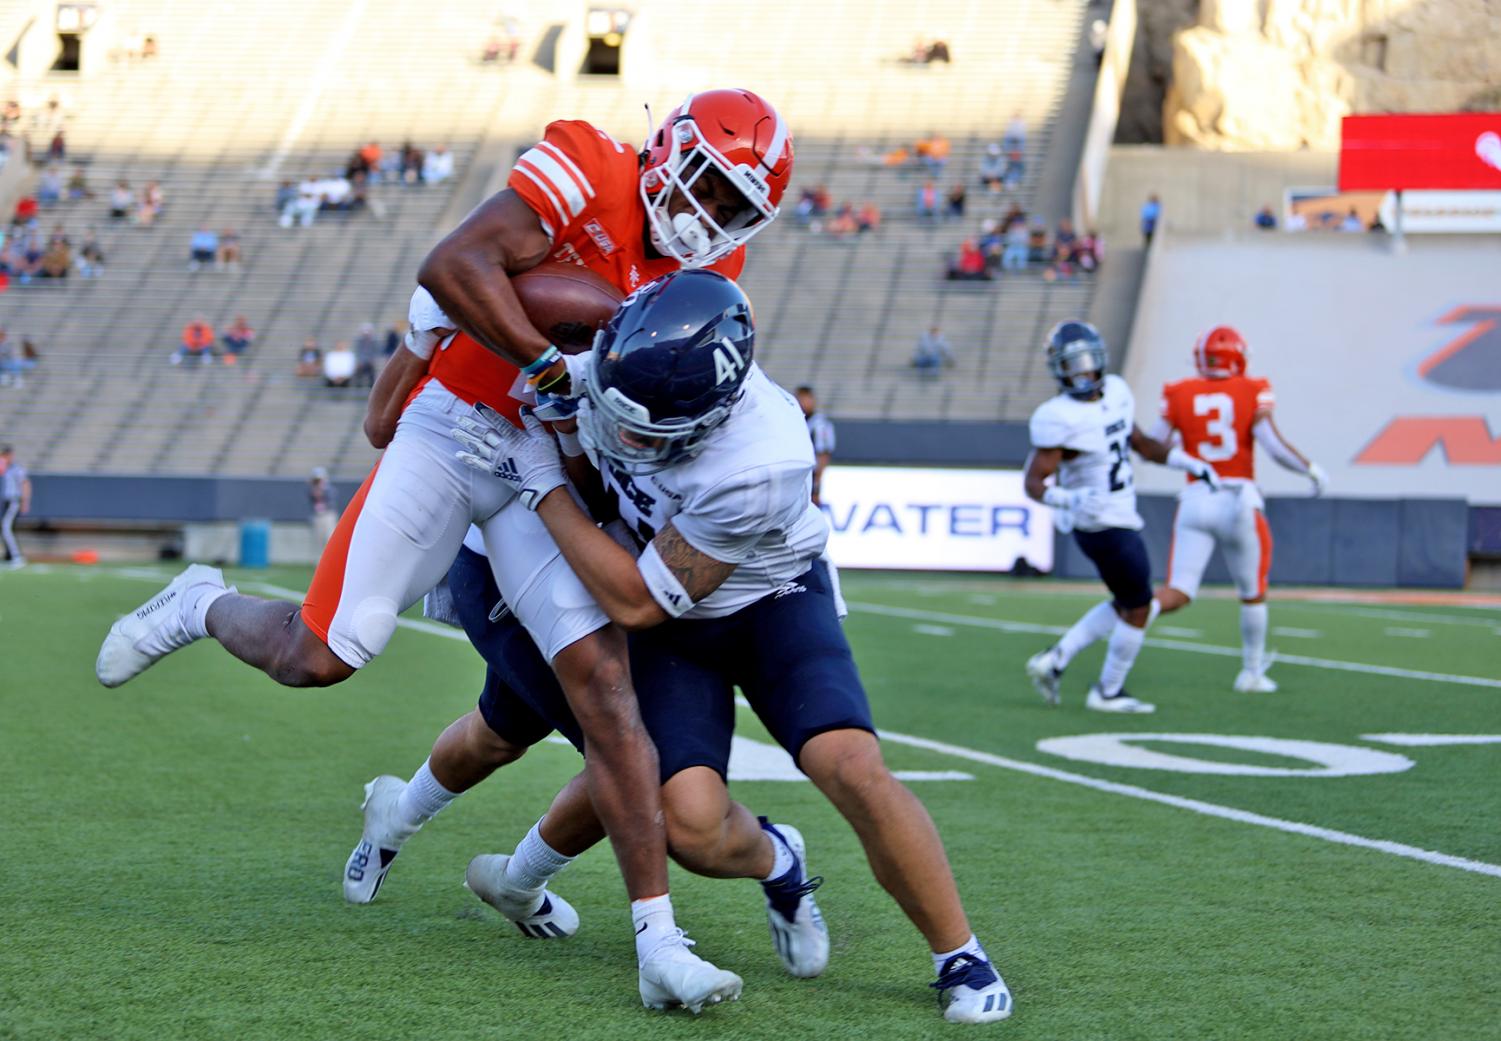 UTEP+Miners+rally+past+Rice+Owls